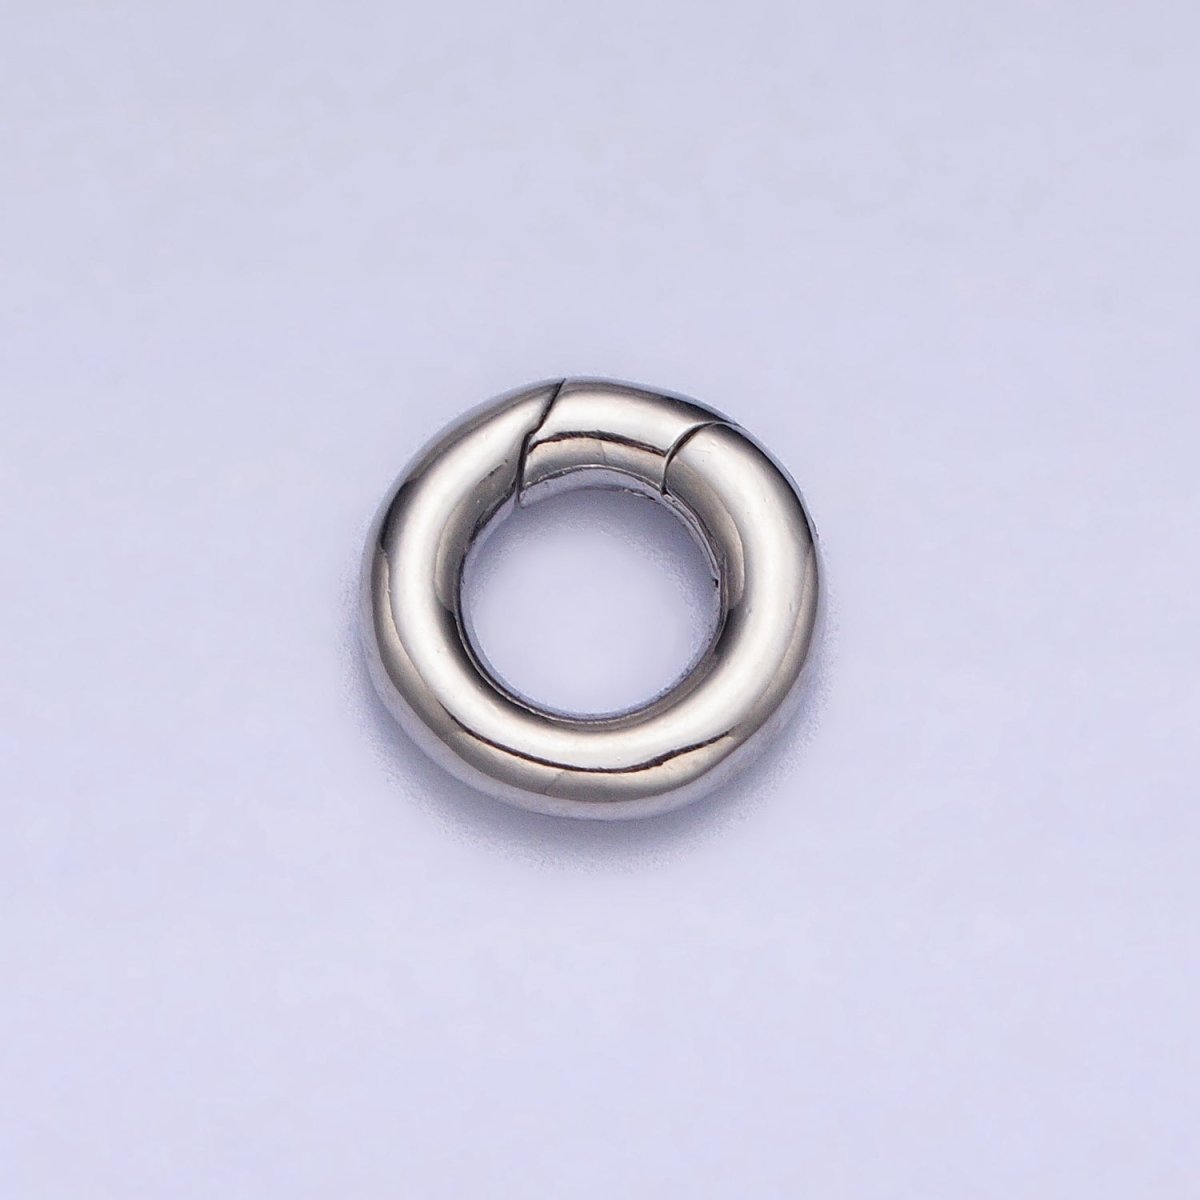 Mini Gold Silver Spring Gate Ring 10mm Round Circle Ring, Round Clasp, Push Clip Clasp, Spring Gate for Jewelry Making Z-303 Z-304 - DLUXCA